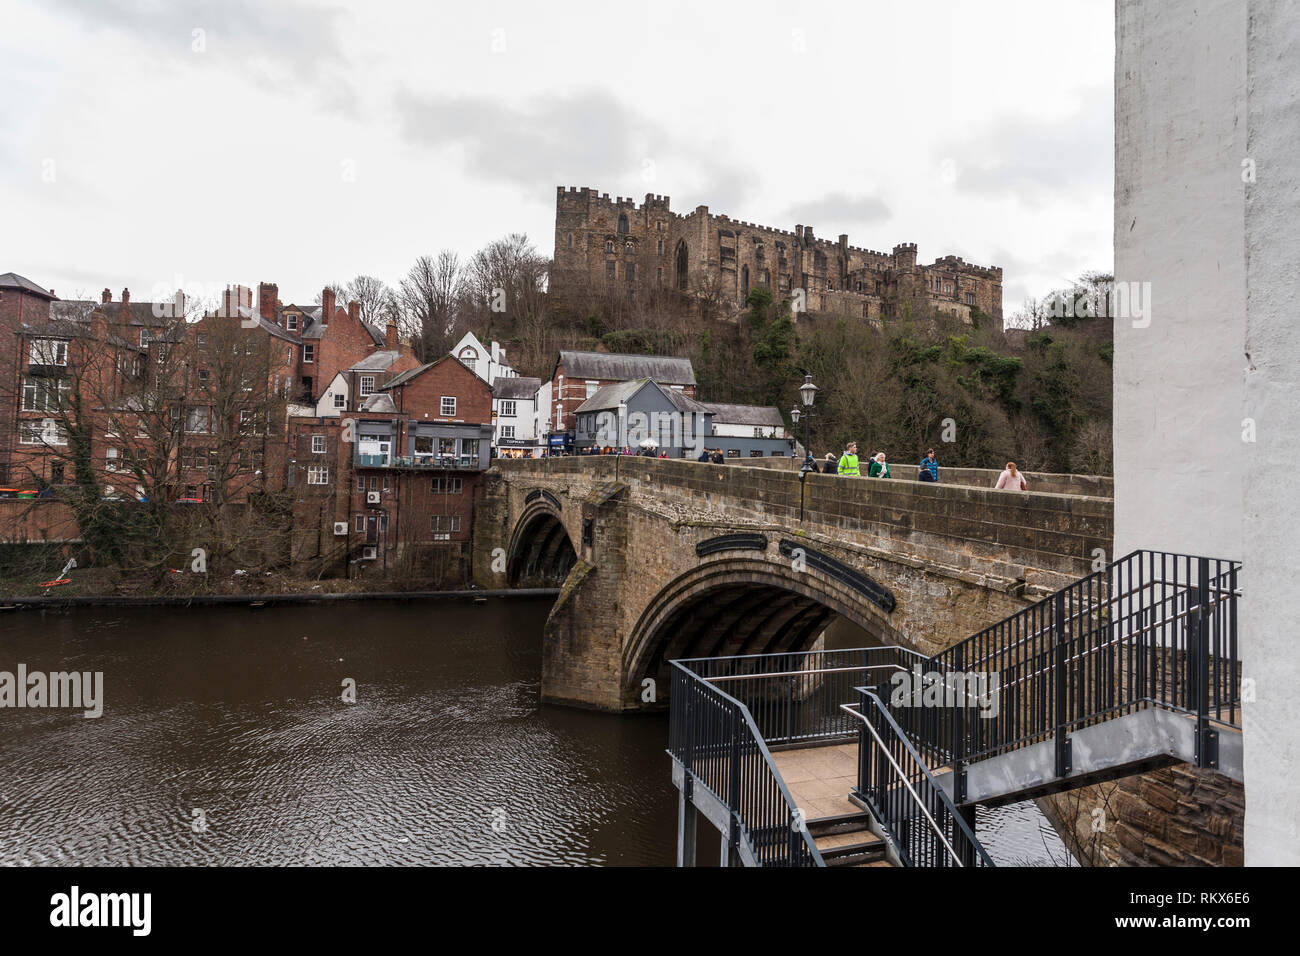 A view across Framwellgate Bridge and the Castle (University College) in the background at Durham,England,UK Stock Photo